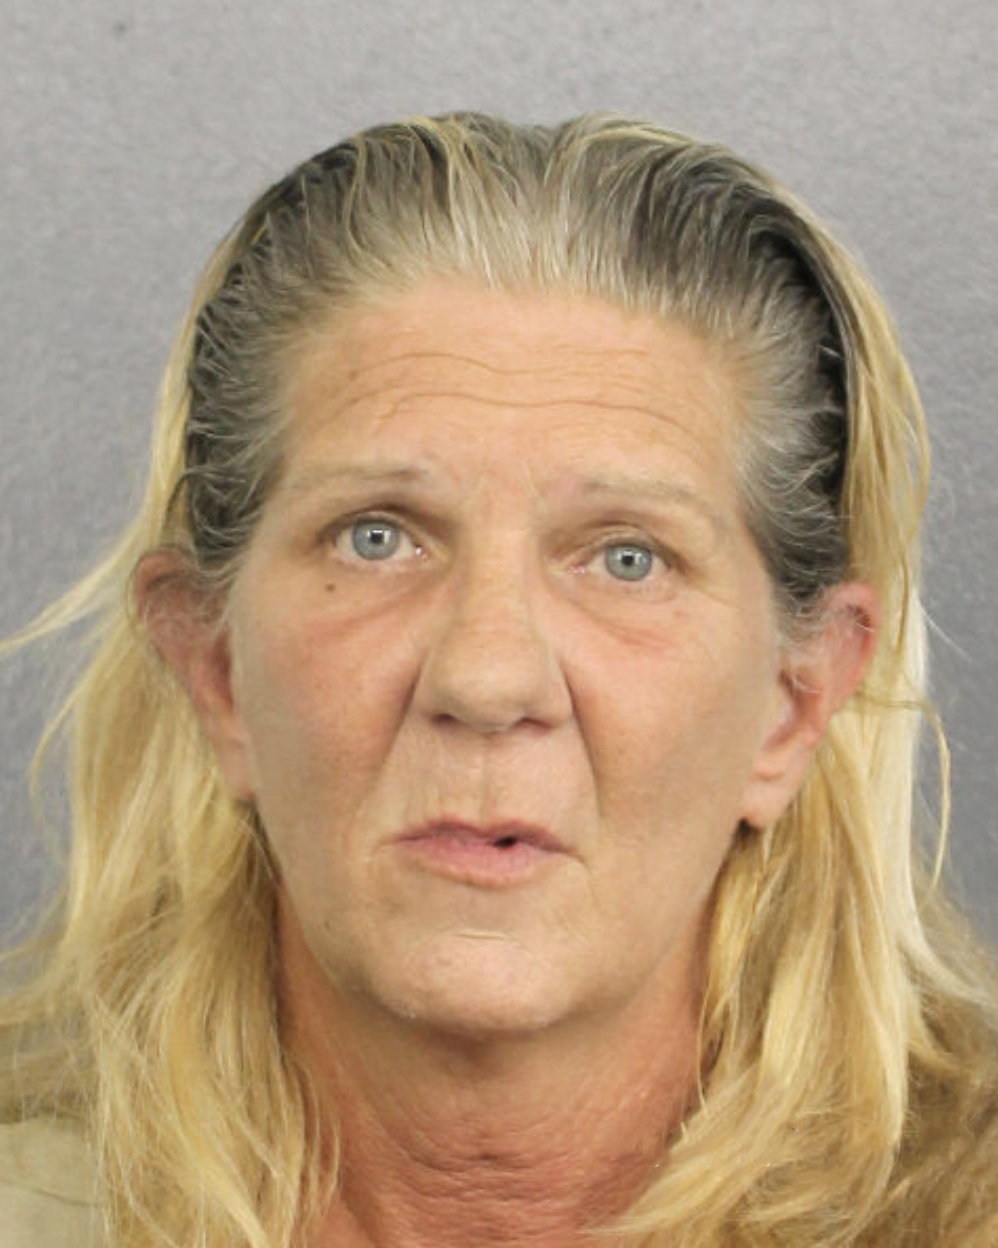 Woman Arrested After Pawning $2,000 Bracelet She Stole from Clients Home • Coral Springs Talk